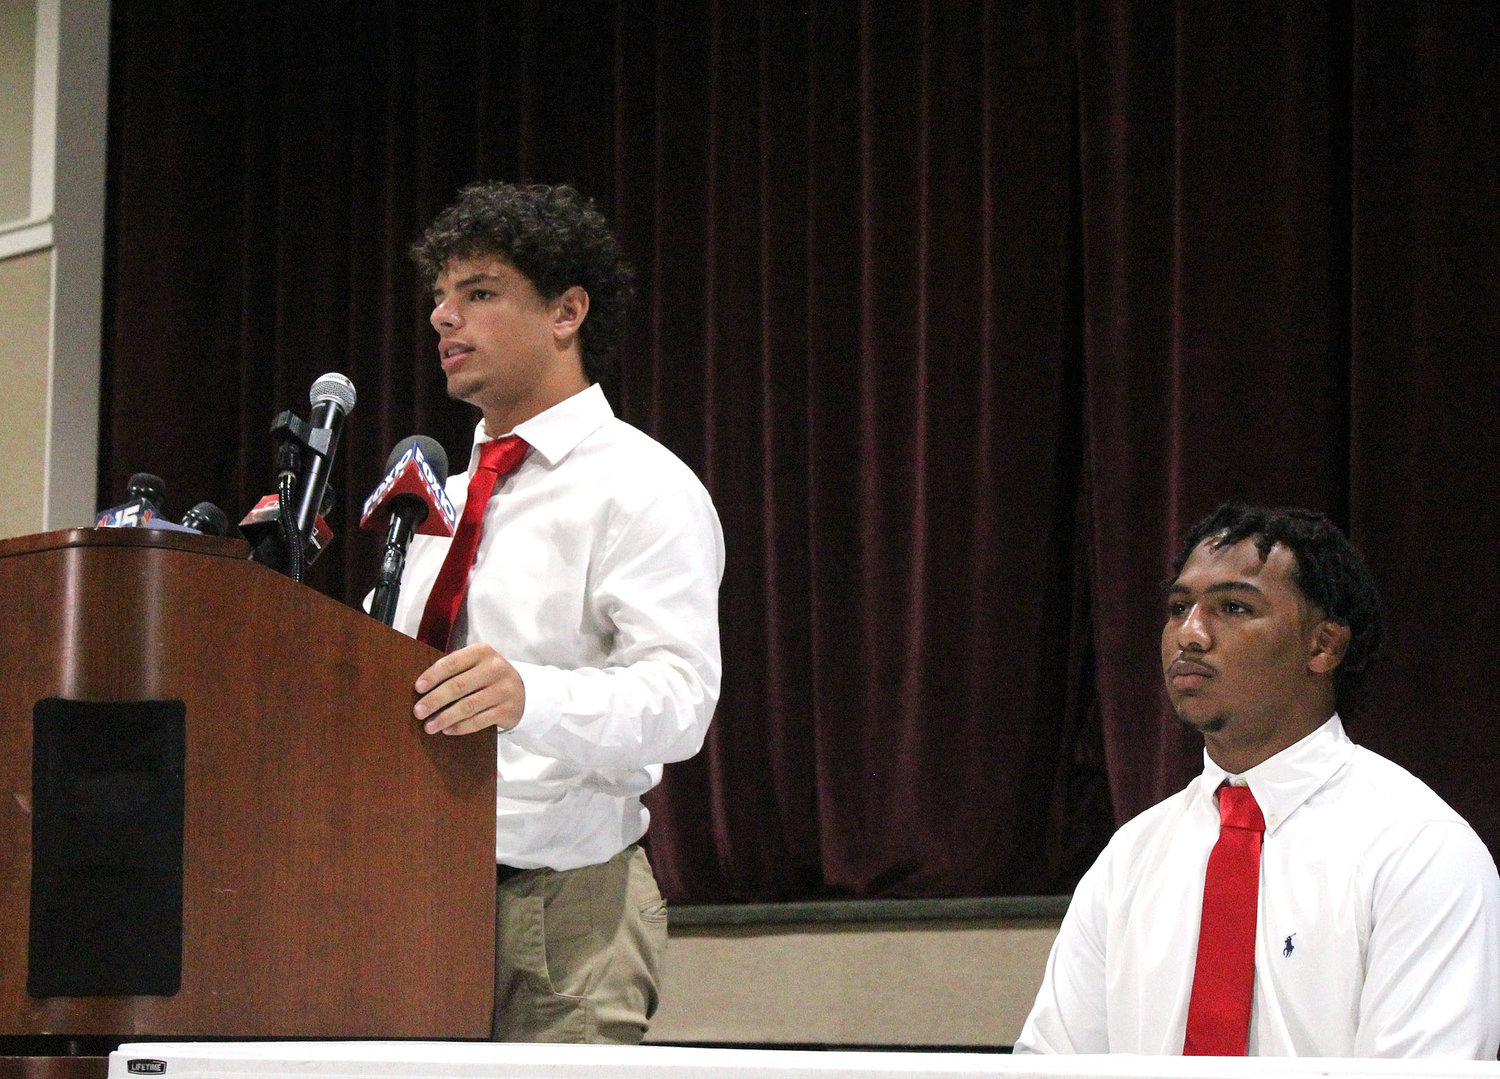 Spanish Fort Toros Josiah Hixon and Jake Godfrey met with members of the press during the Baldwin County Media Day event in Trojan Hall at Daphne High School last Wednesday, July 13.